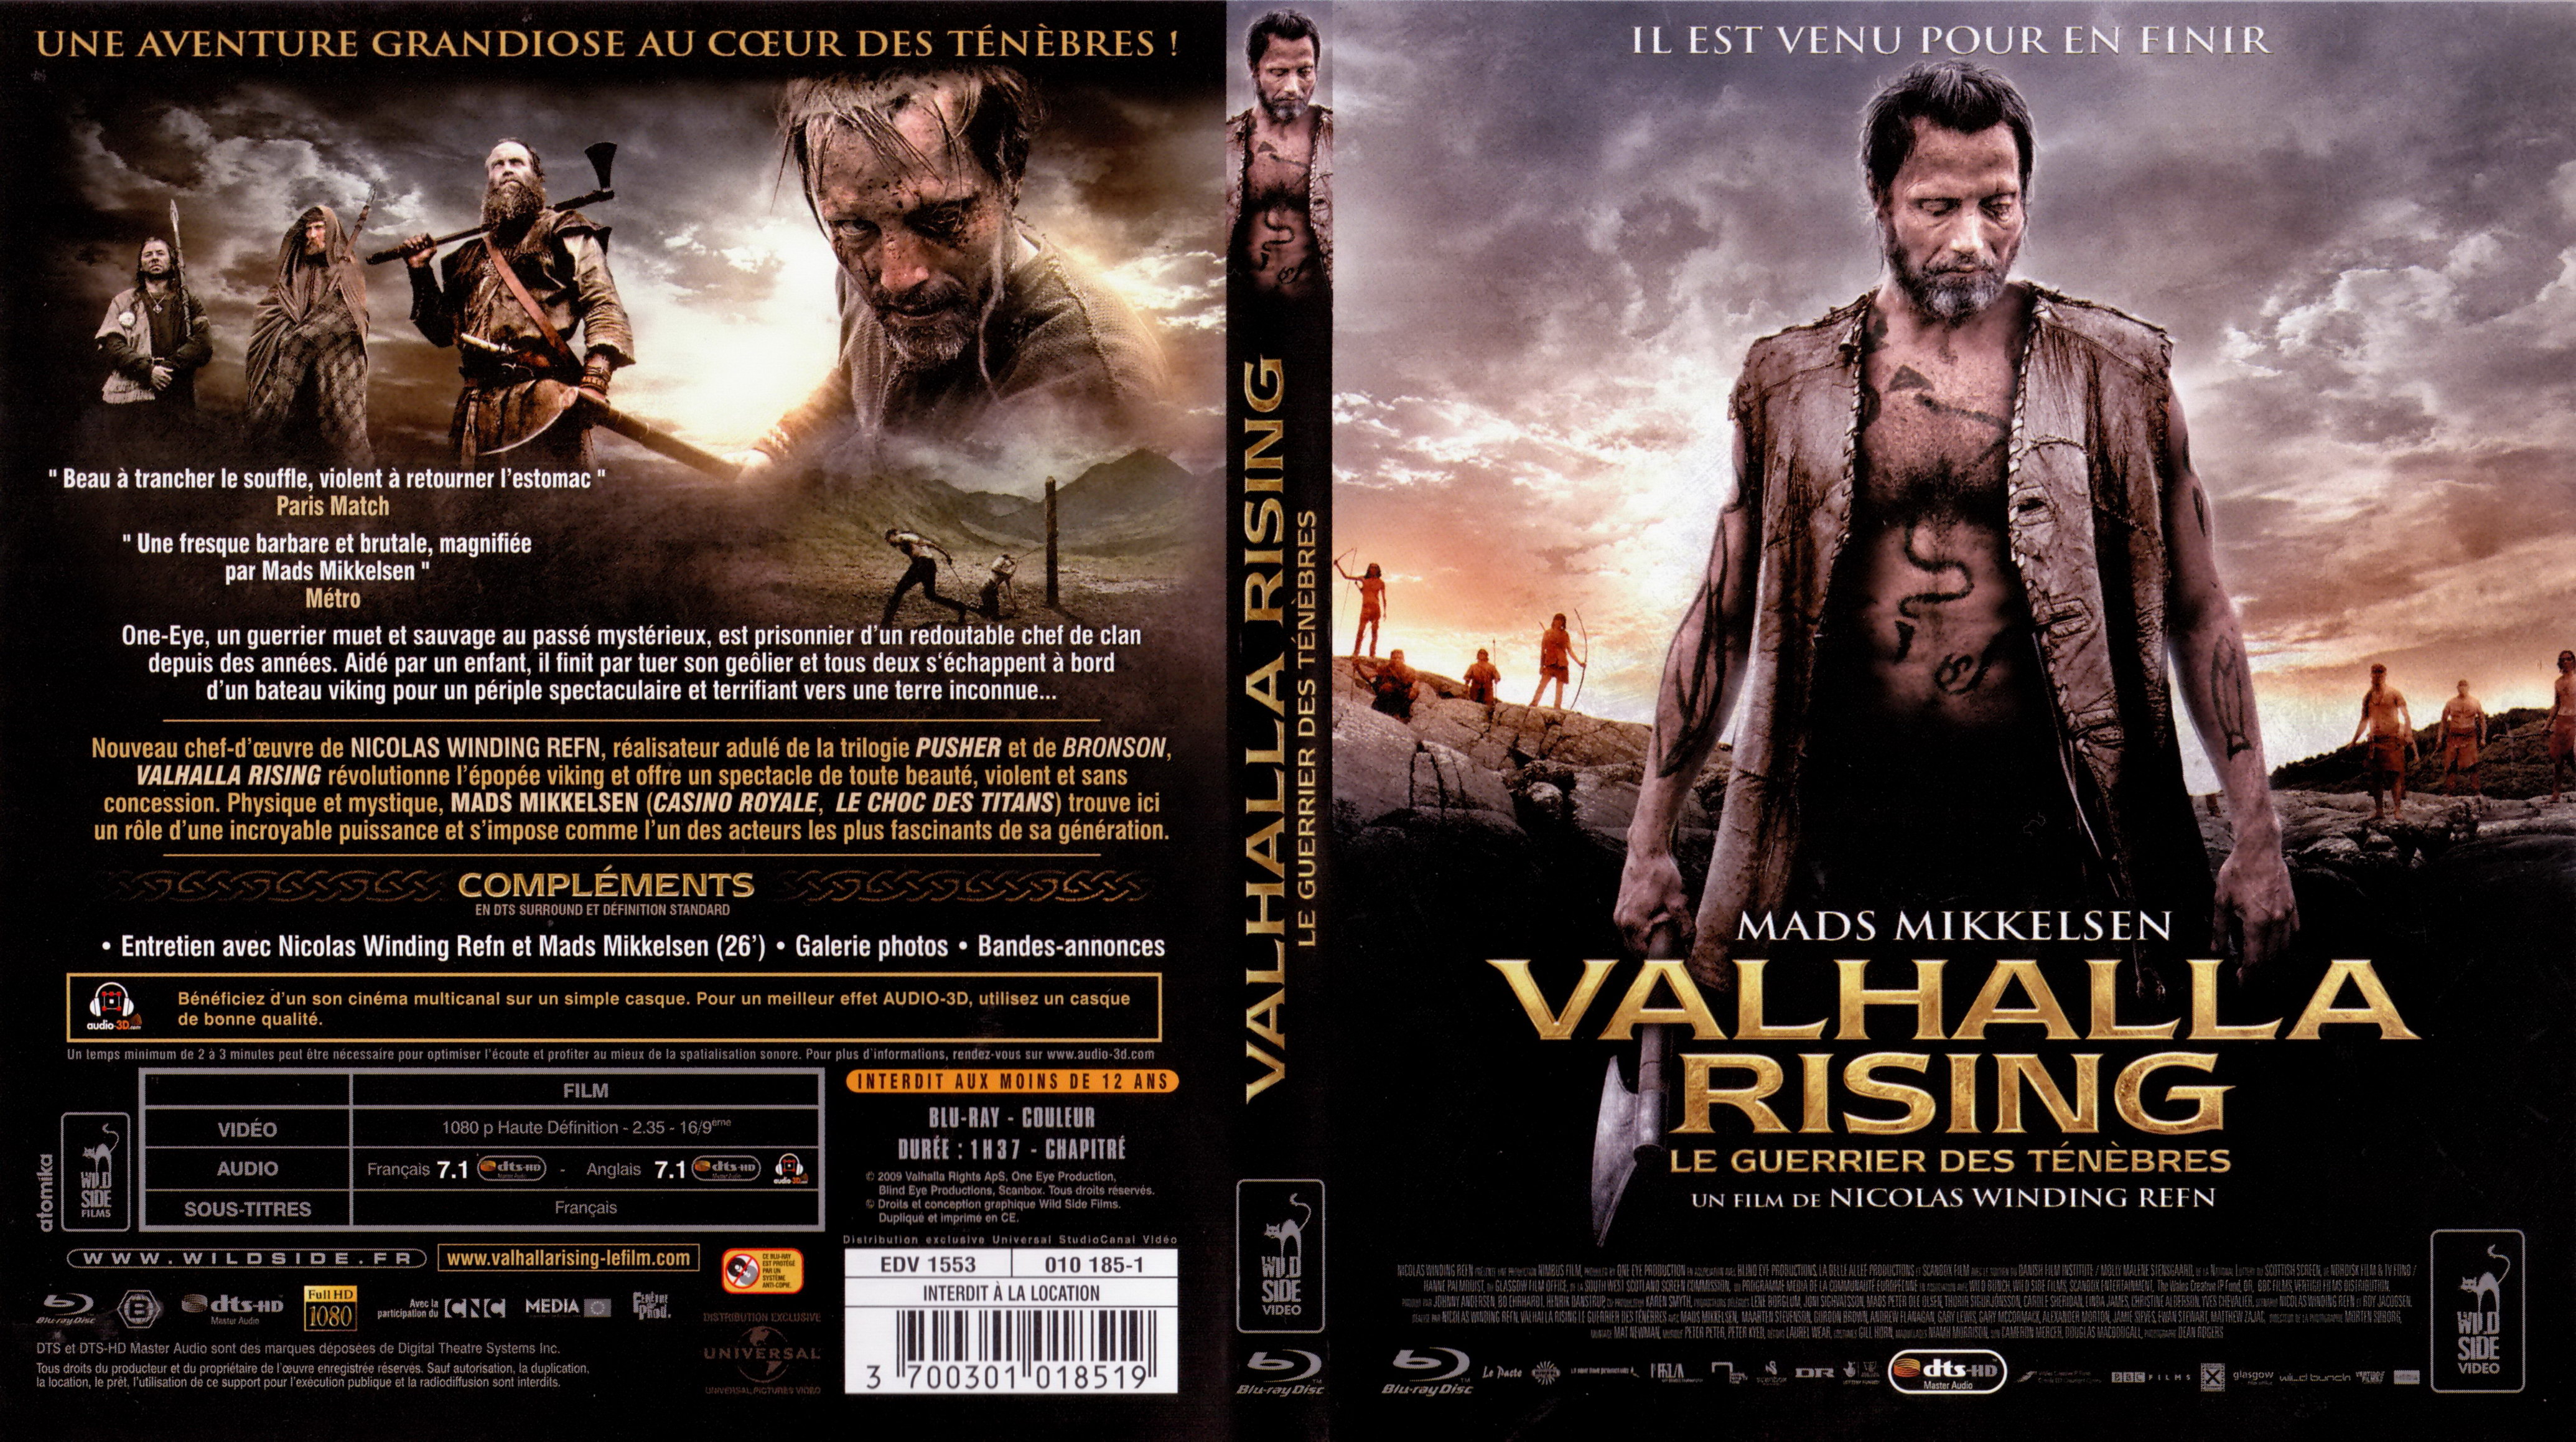 Jaquette DVD Valhalla rising (BLU-RAY)